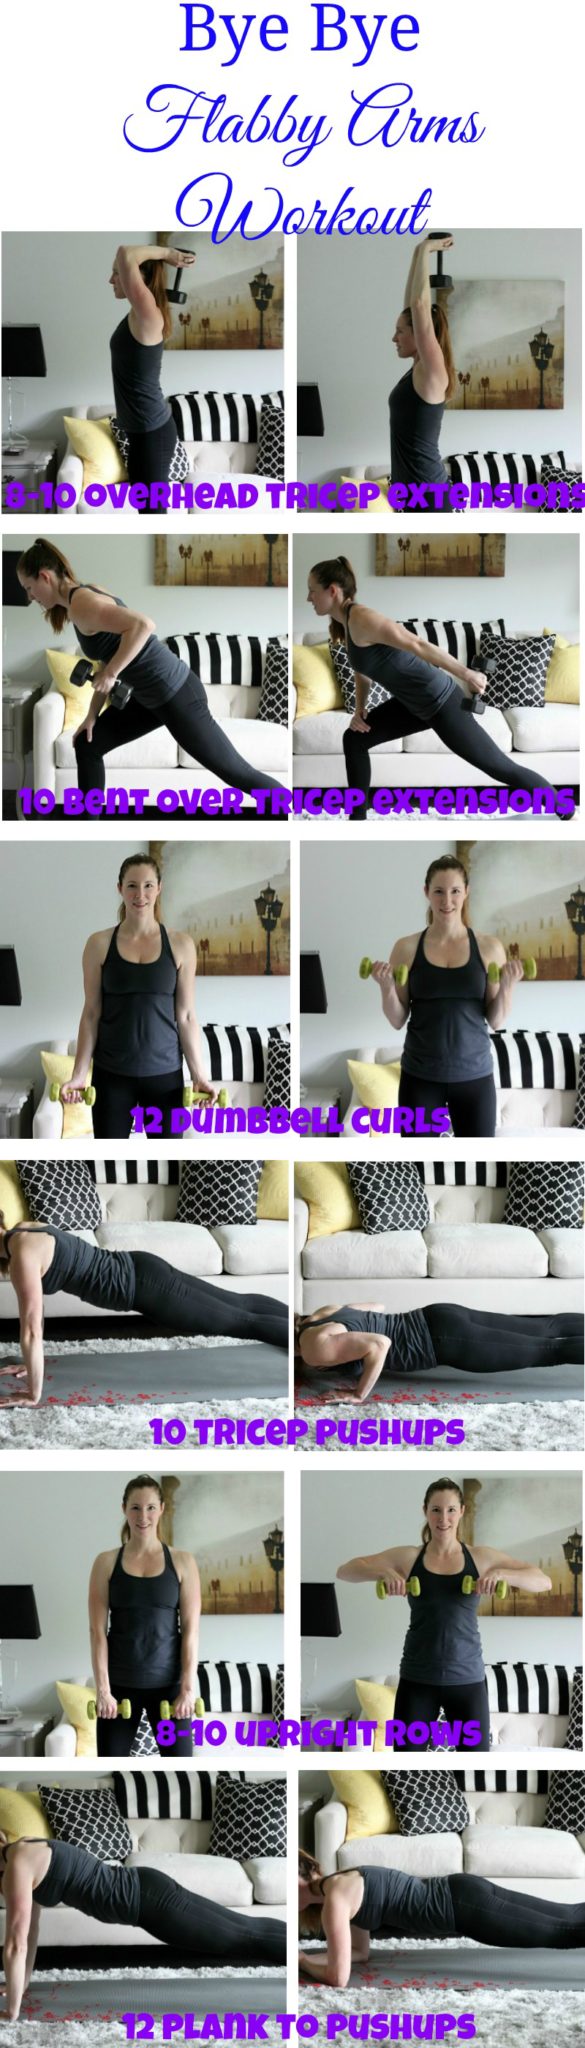 10 EXERCISES TO REDUCE FLABBY ARMS - Bat Wings Workout 